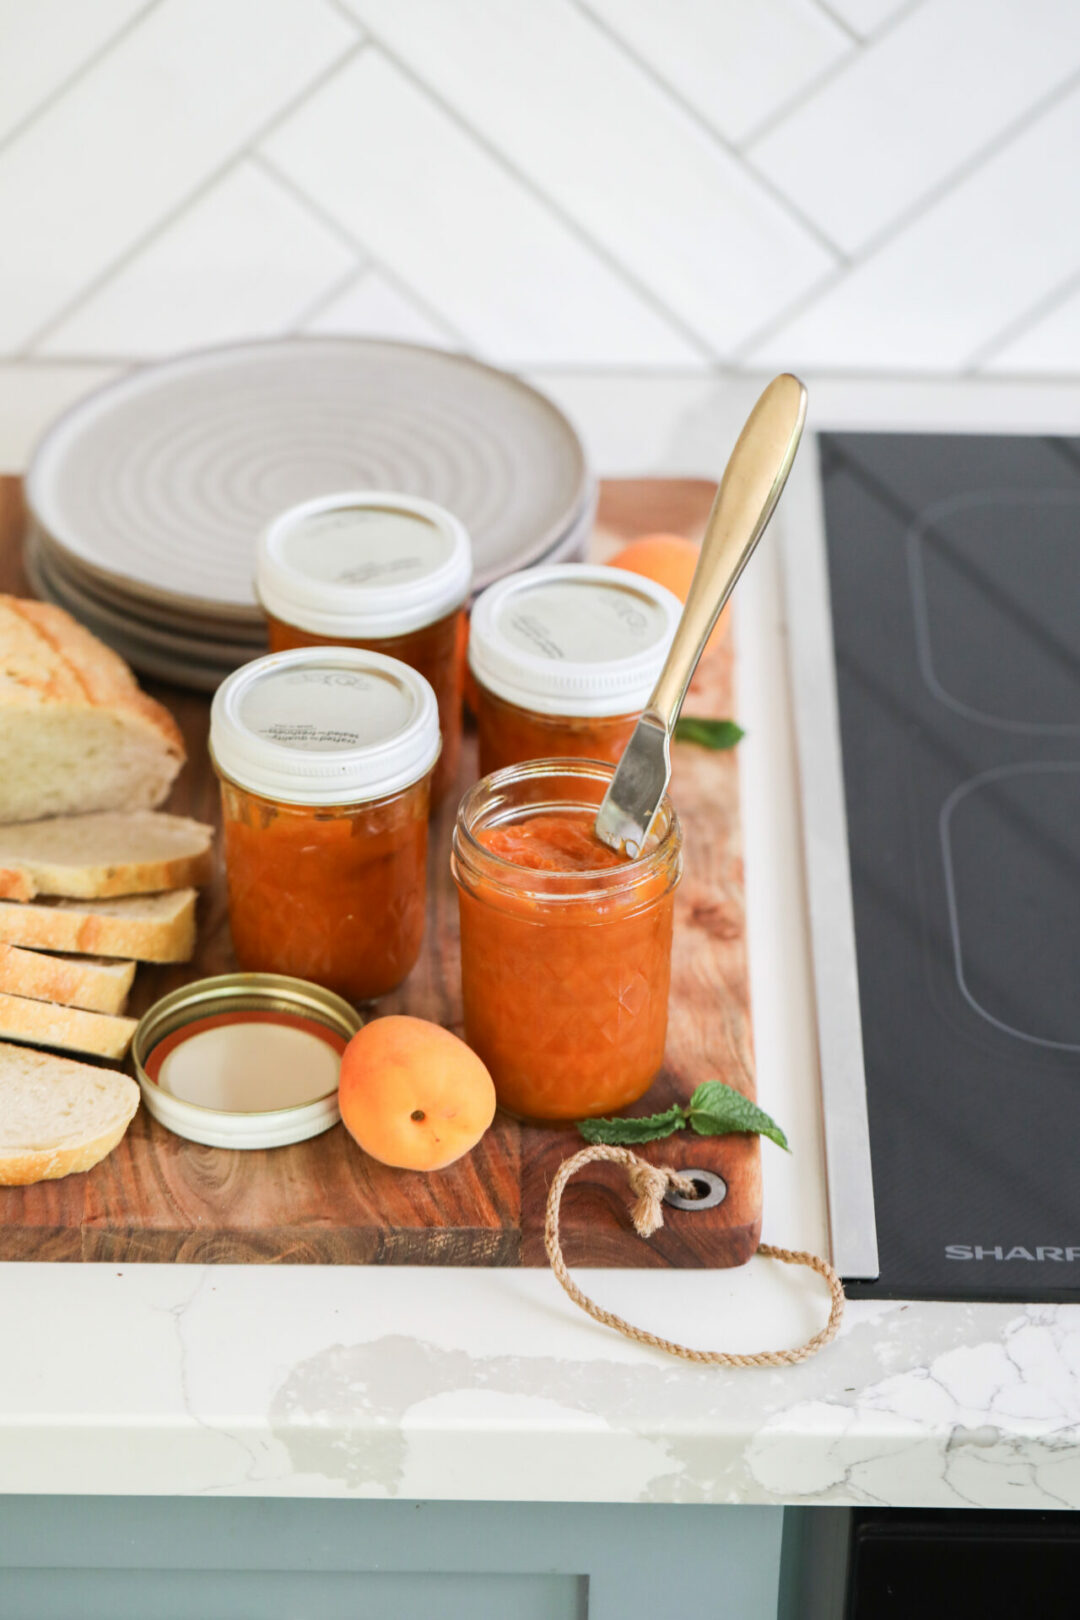 Sunkissed Kitchen's apricot jam recipe on the Sharp 30 in. Induction Cooktop with Side Accessories (SCH3043GB).